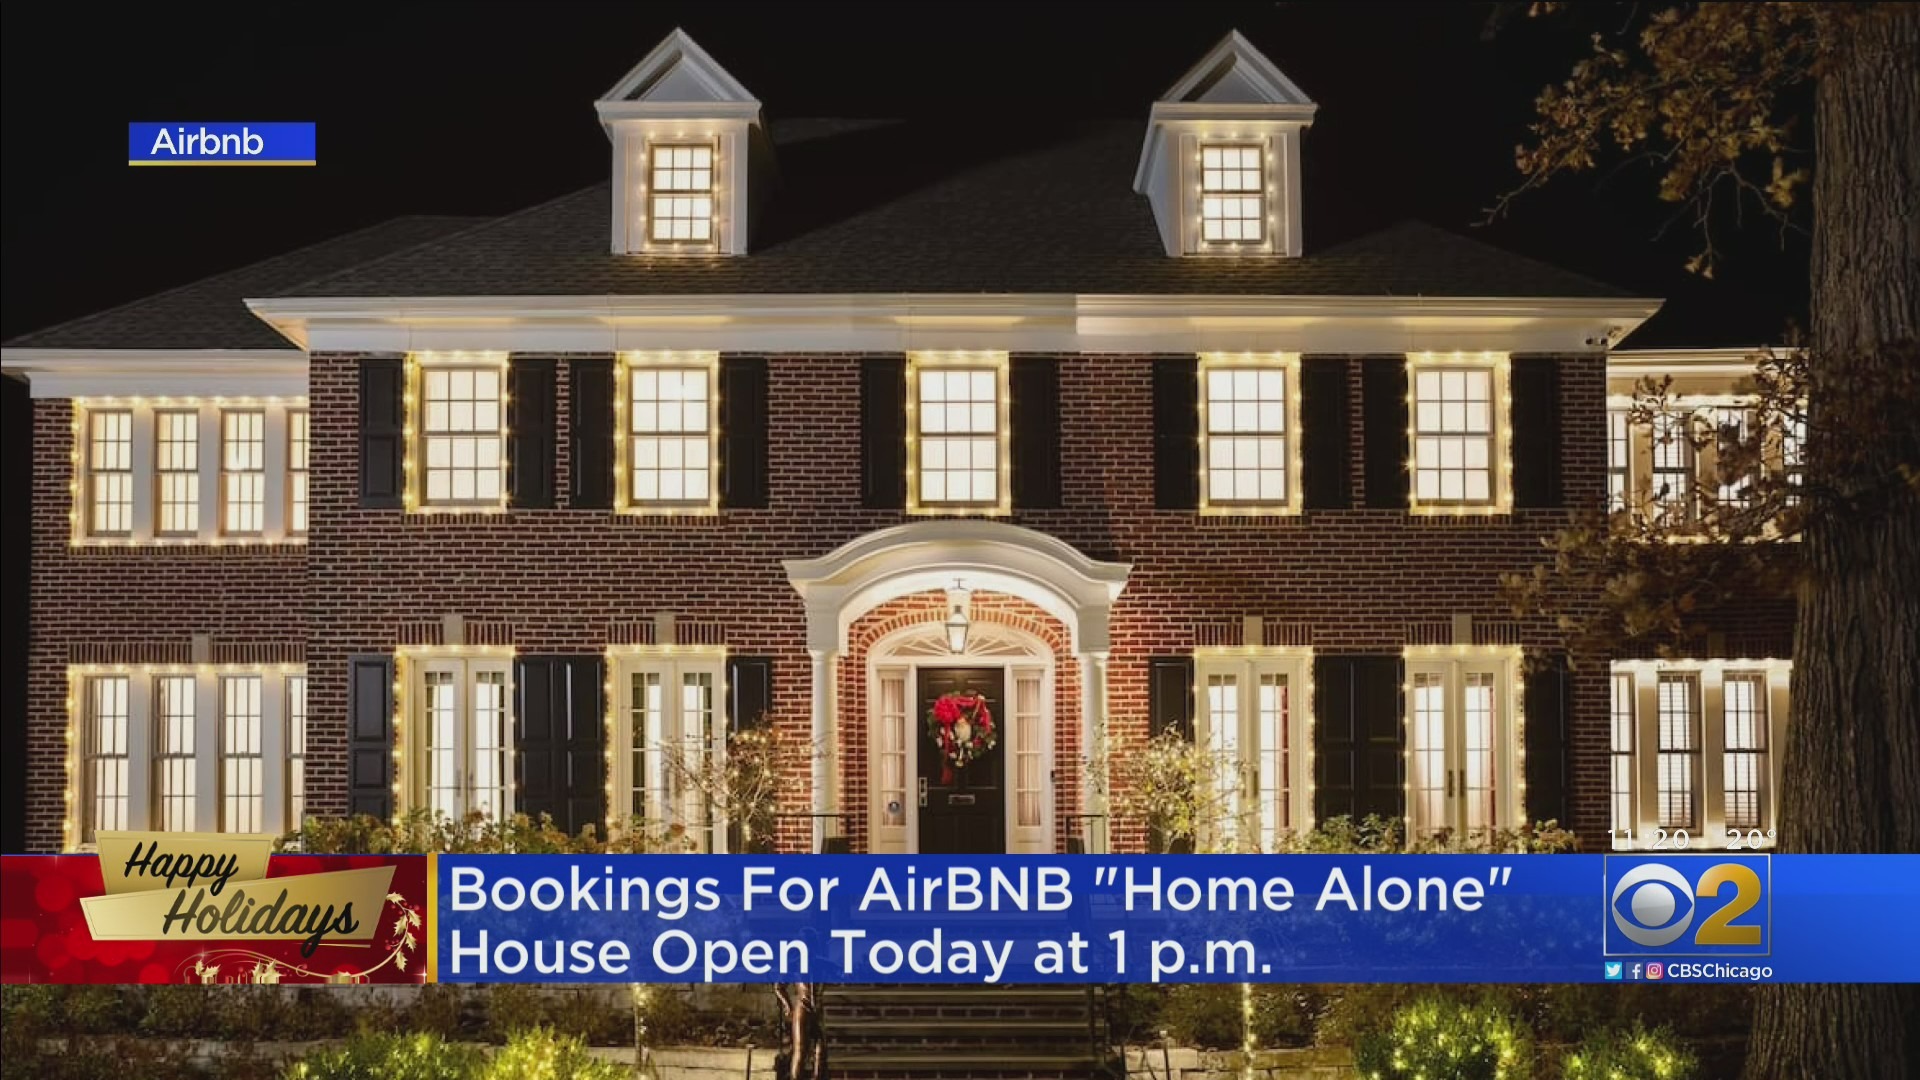 Airbnb 'Home Alone' reservations open Tuesday - CBS Chicago